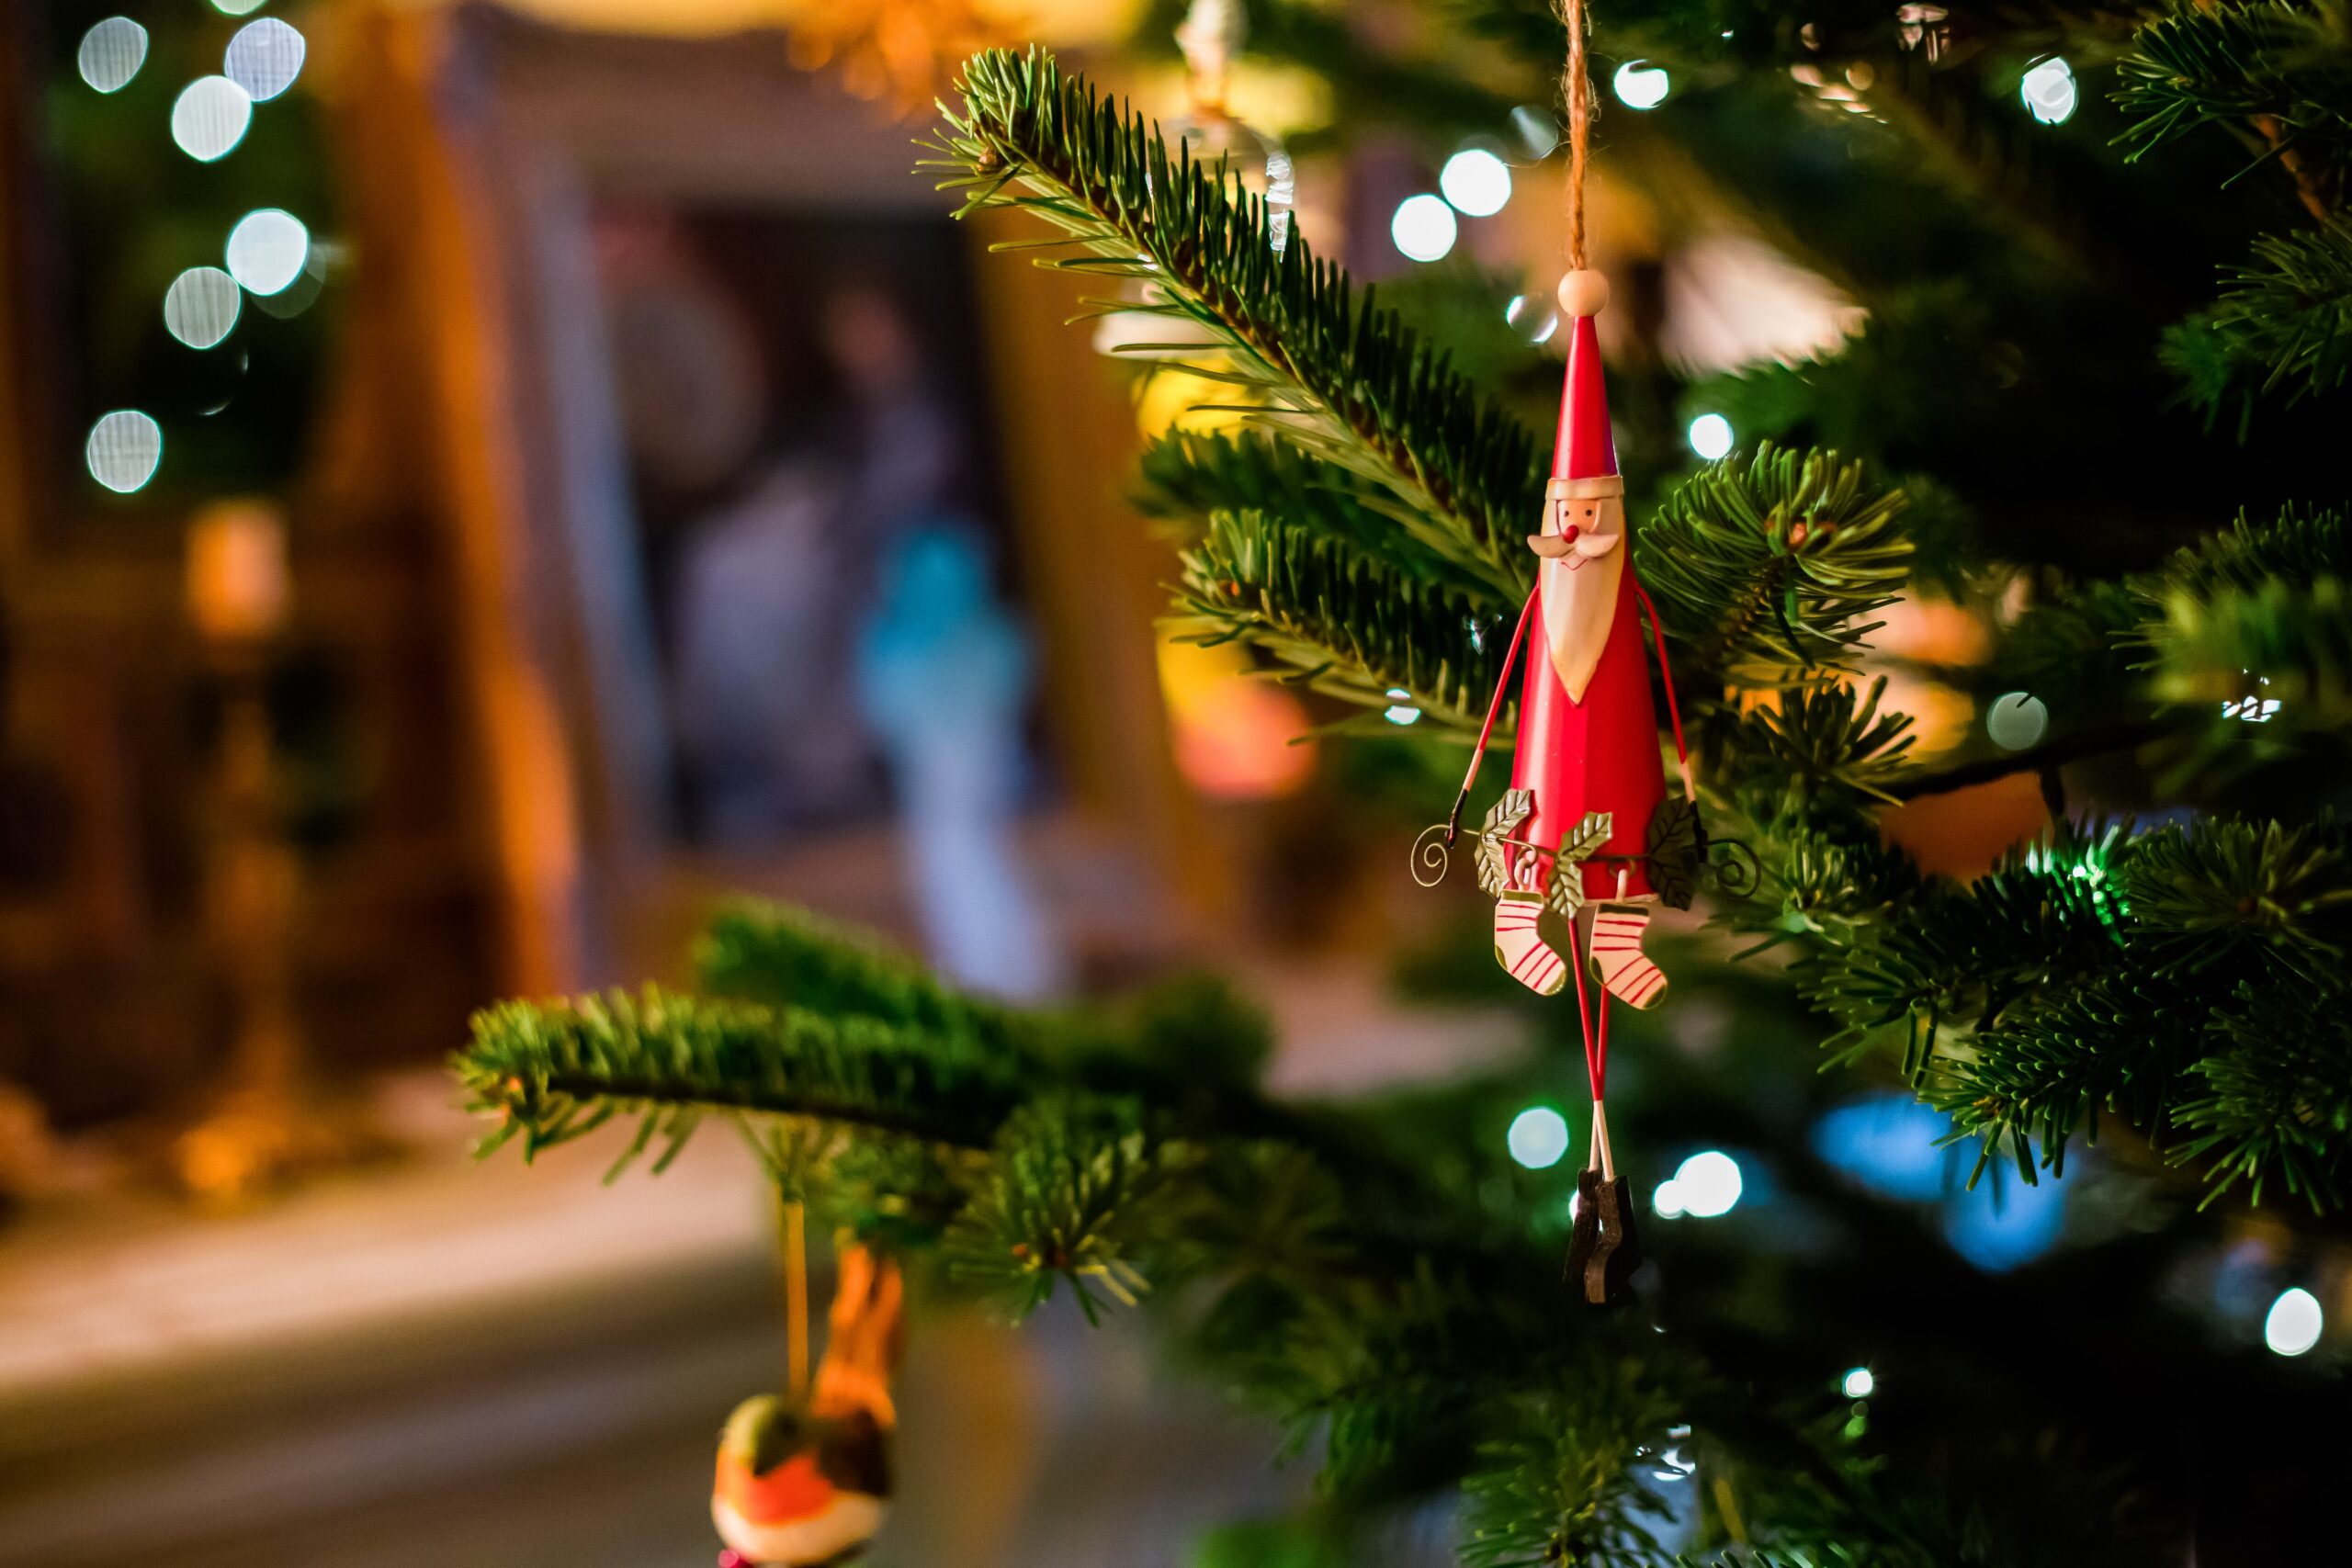 Santa Claus decoration hanging on a Christmas tree